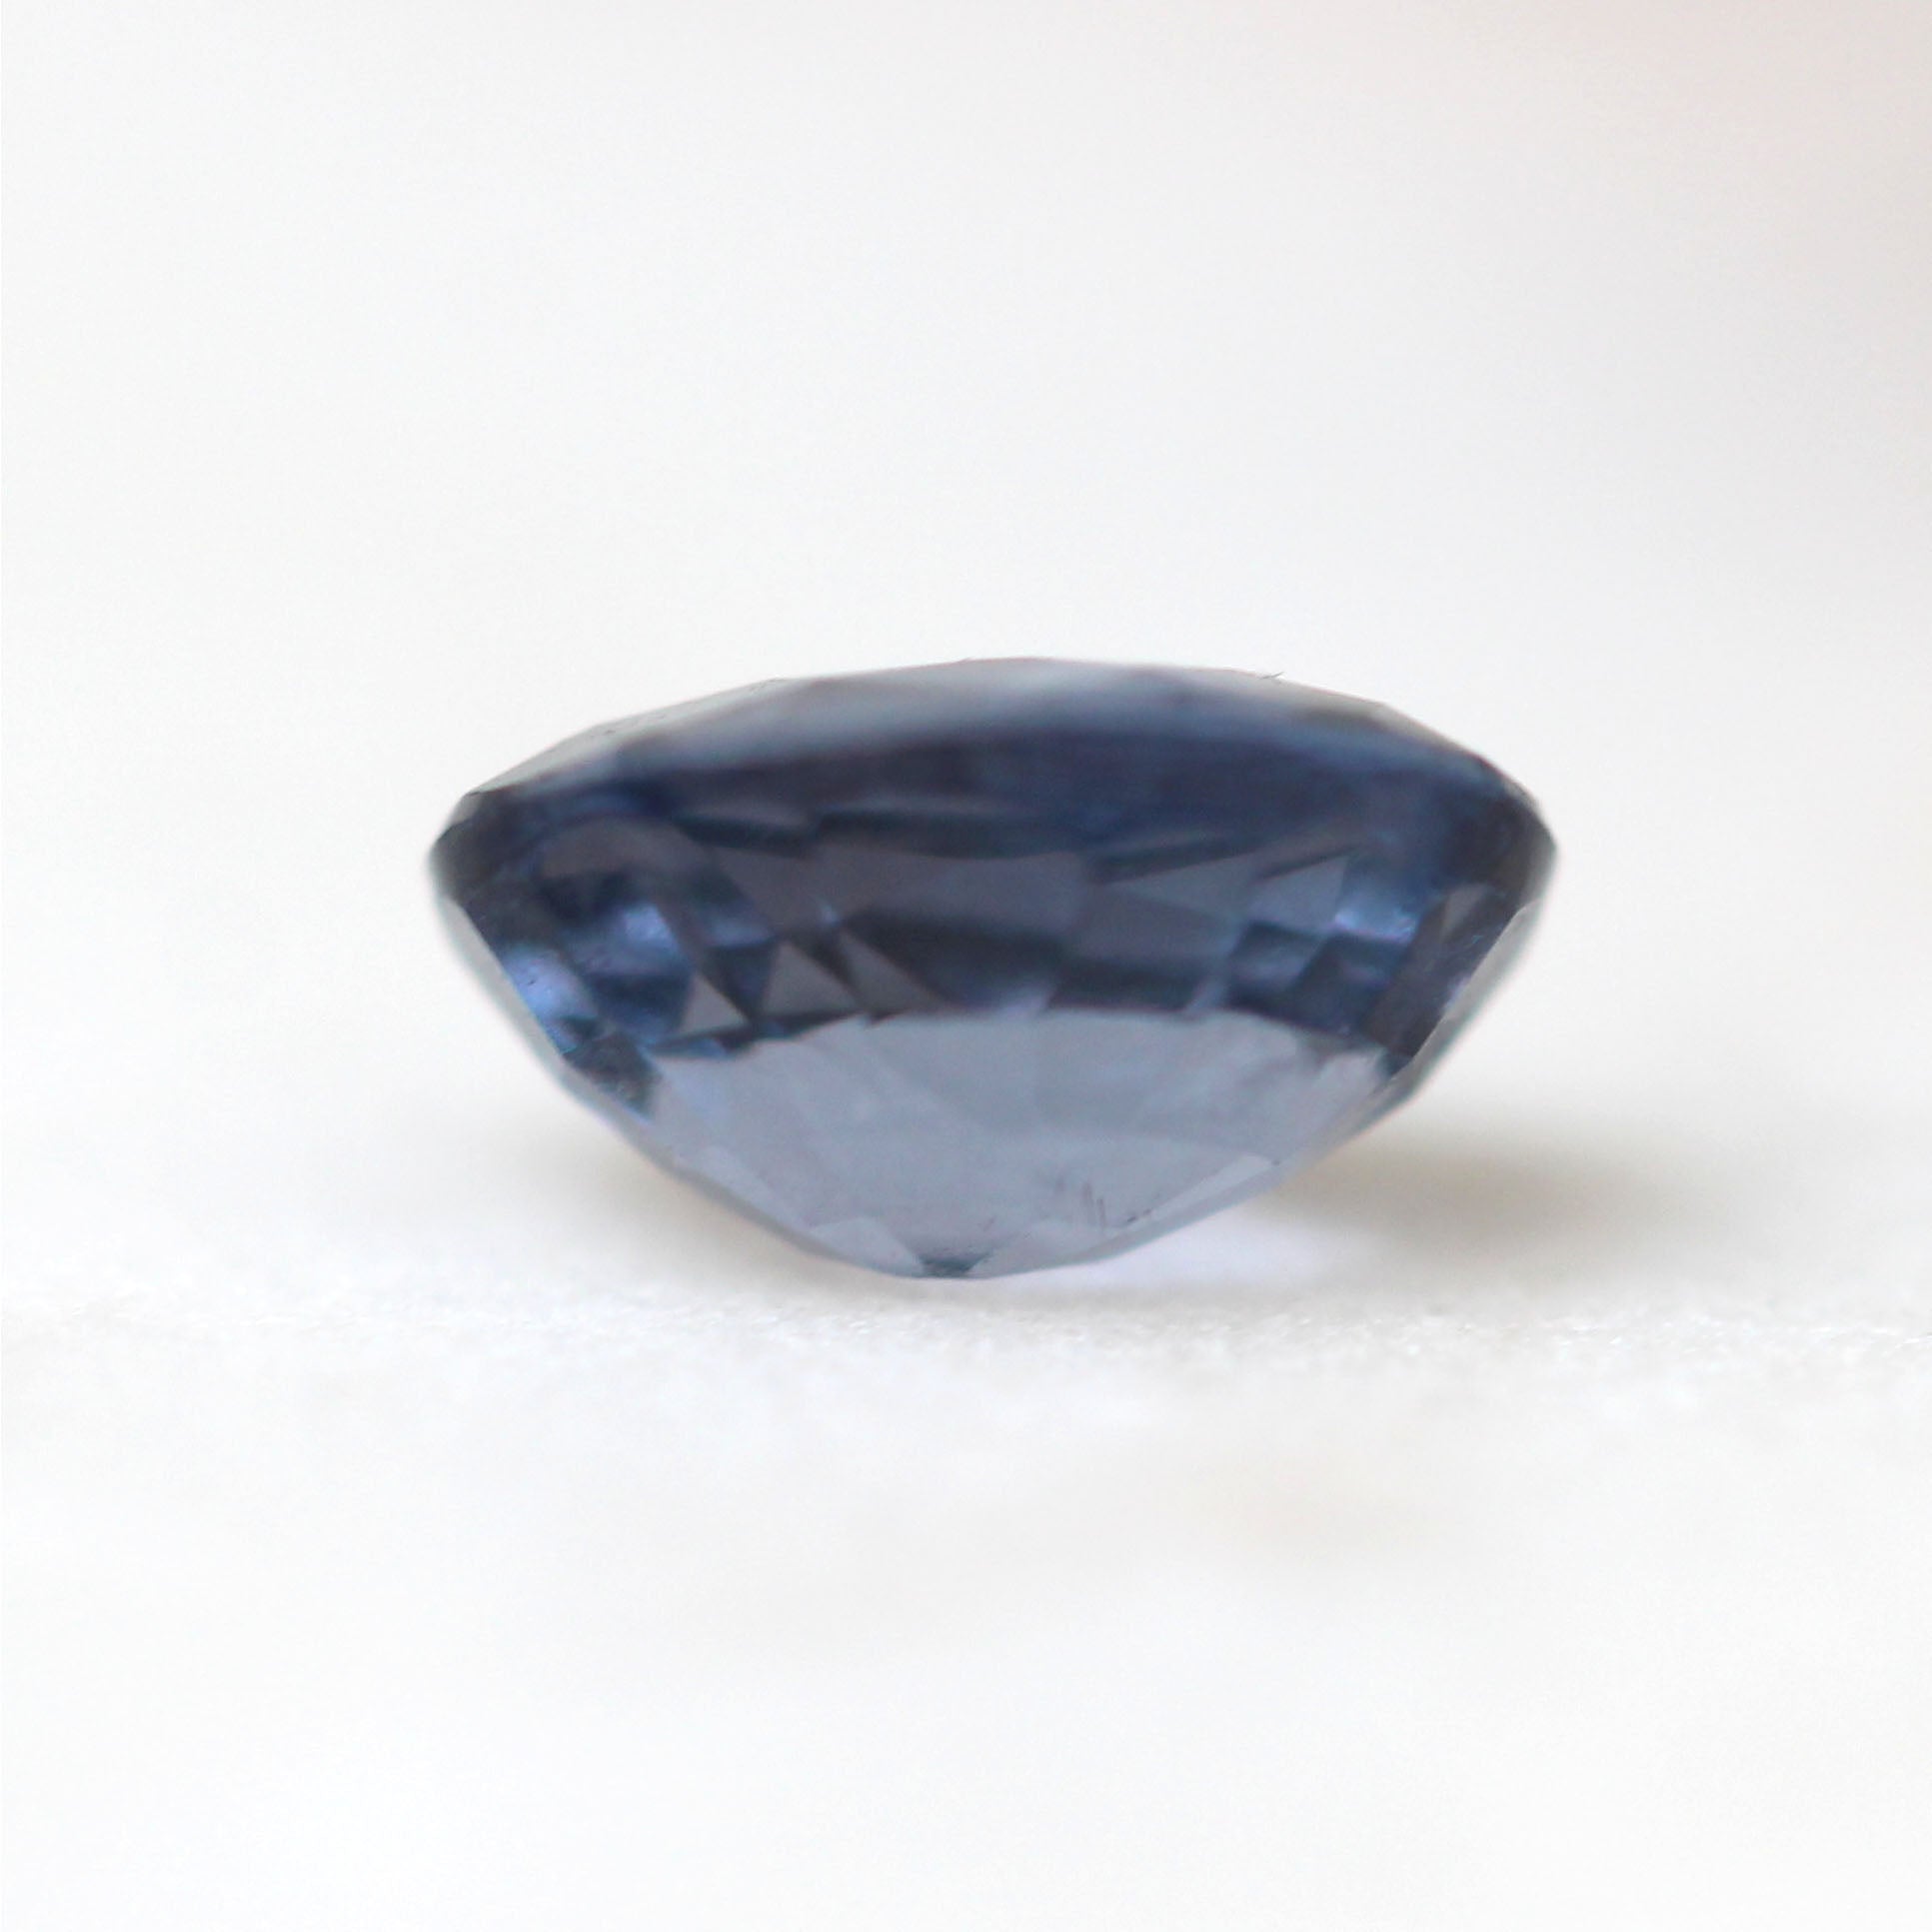 1.02 Carat Blue Oval Sapphire for Custom Work - Inventory Code BOSAP102 - Midwinter Co. Alternative Bridal Rings and Modern Fine Jewelry